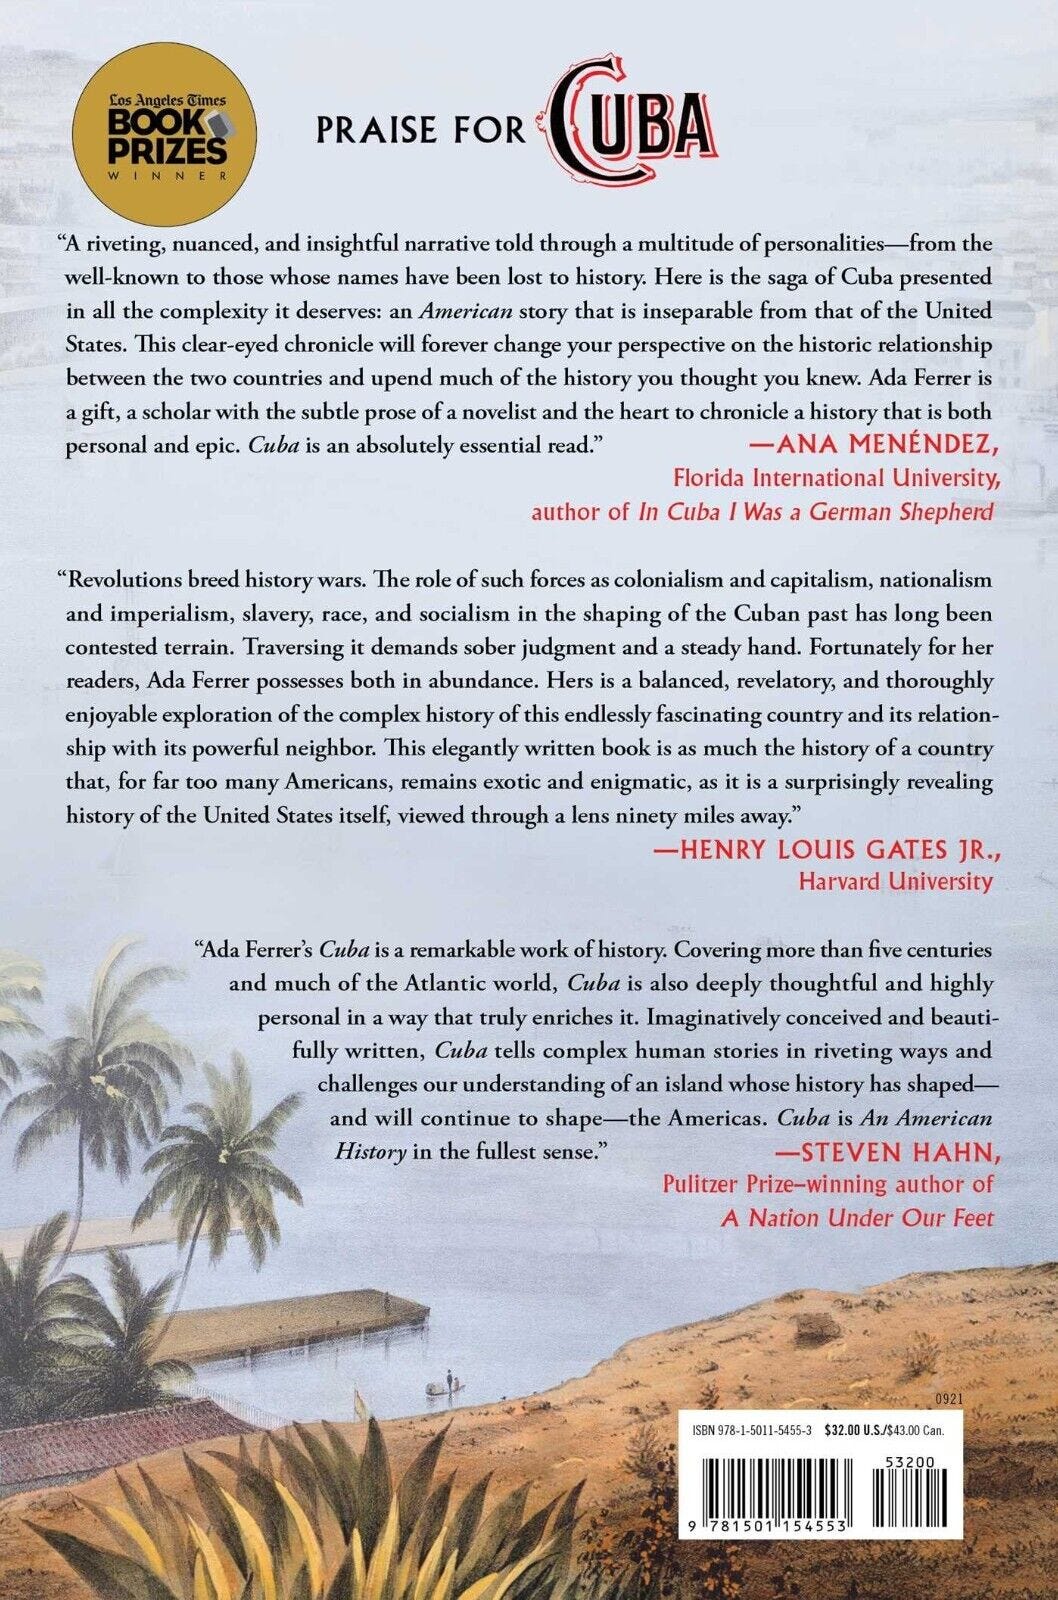 Tha back cover for a book called Cuba An American History, with blurbs written by professors from Florida International University and Harvard University as well as a Pulitzer Prize winning author. 